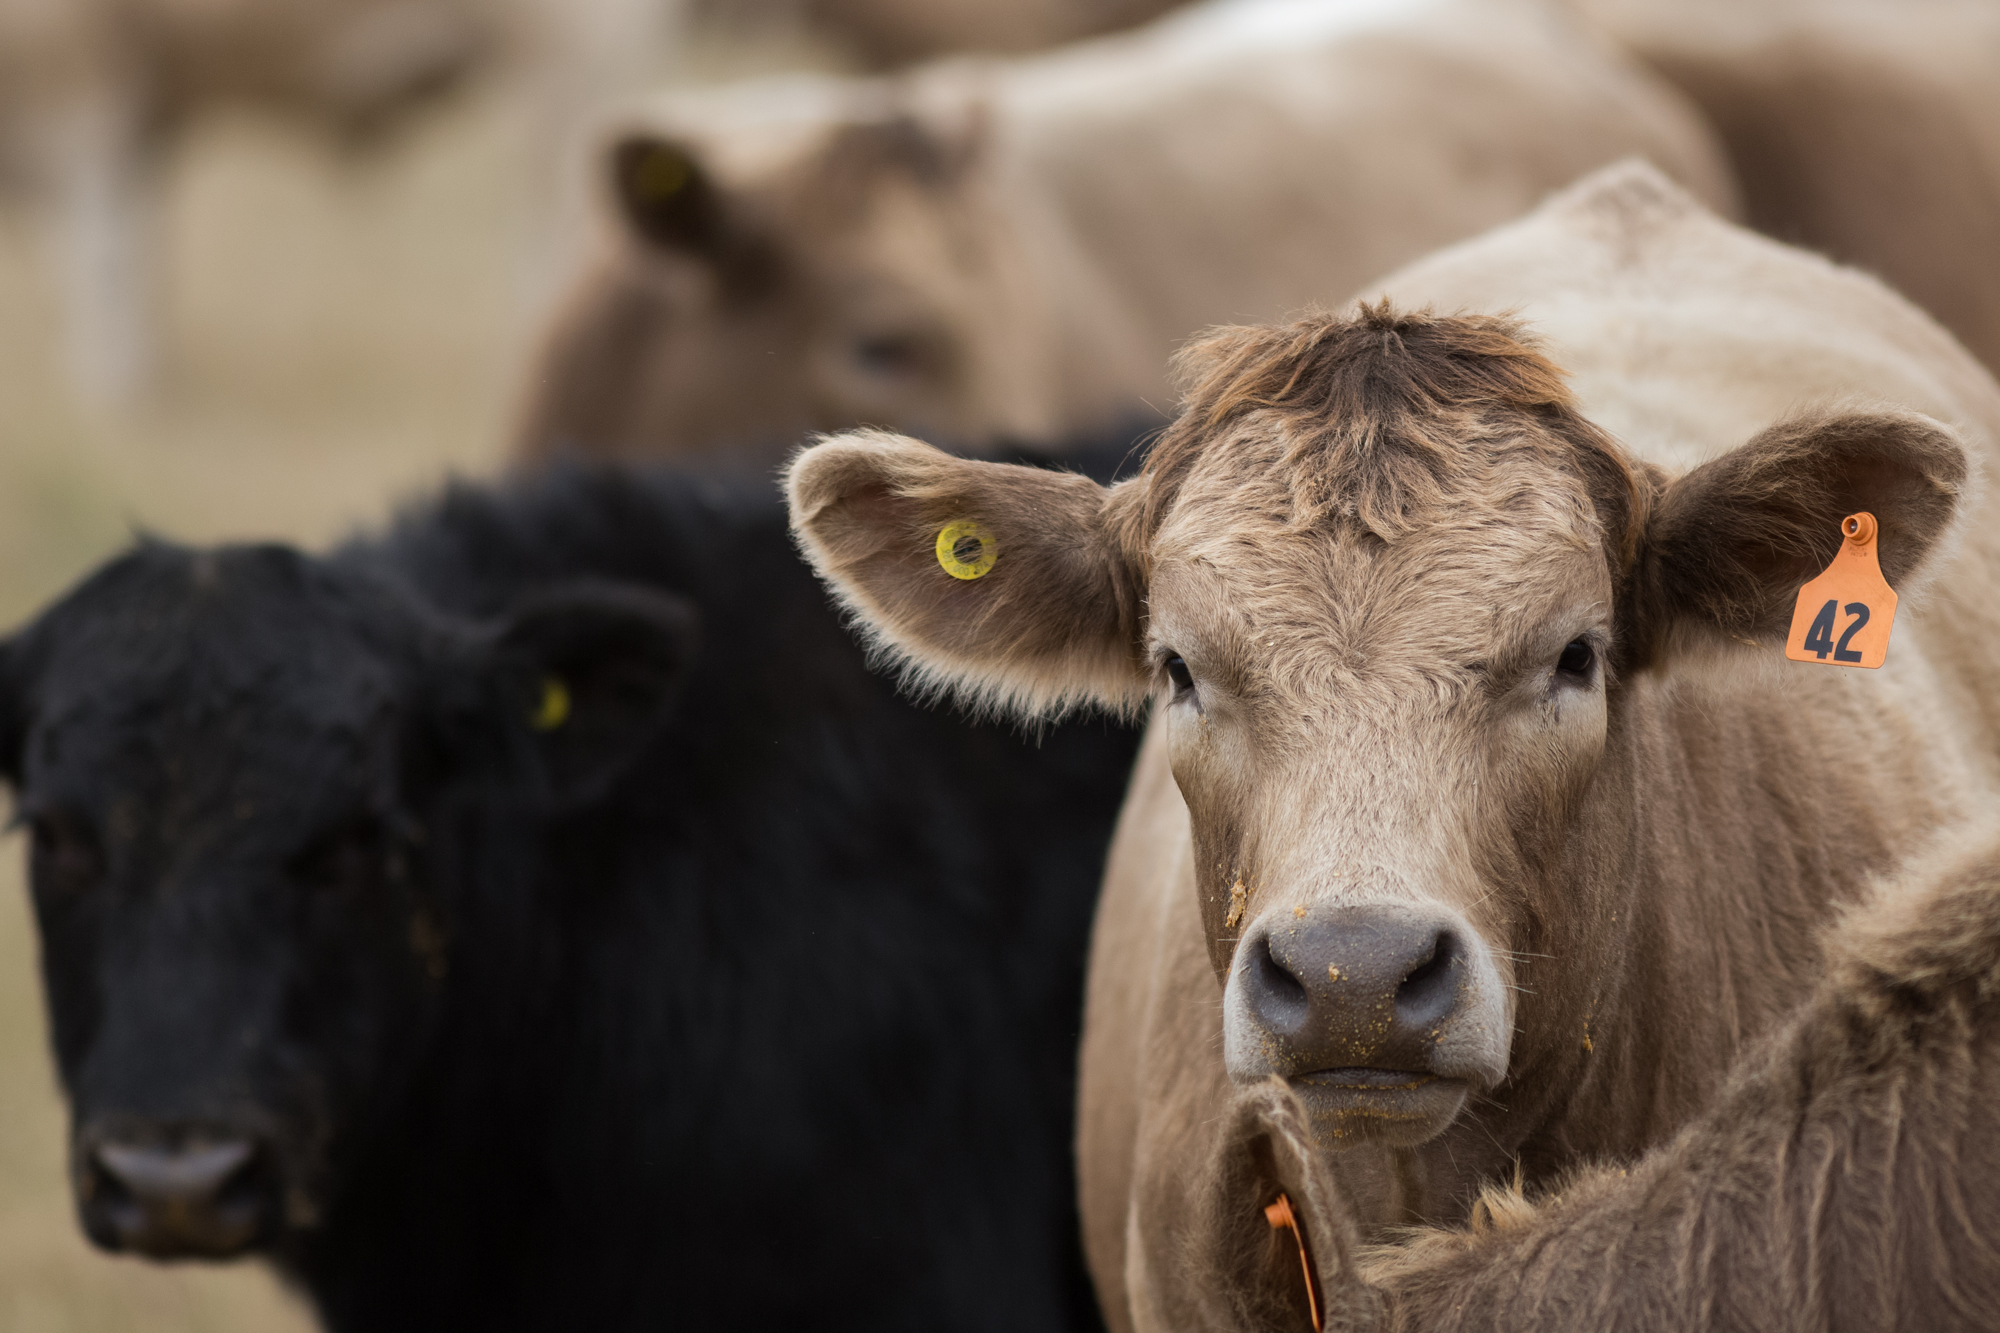 NCBA's Colin Woodall and Scott Yager on Cattle Industry's Sustainability Goals